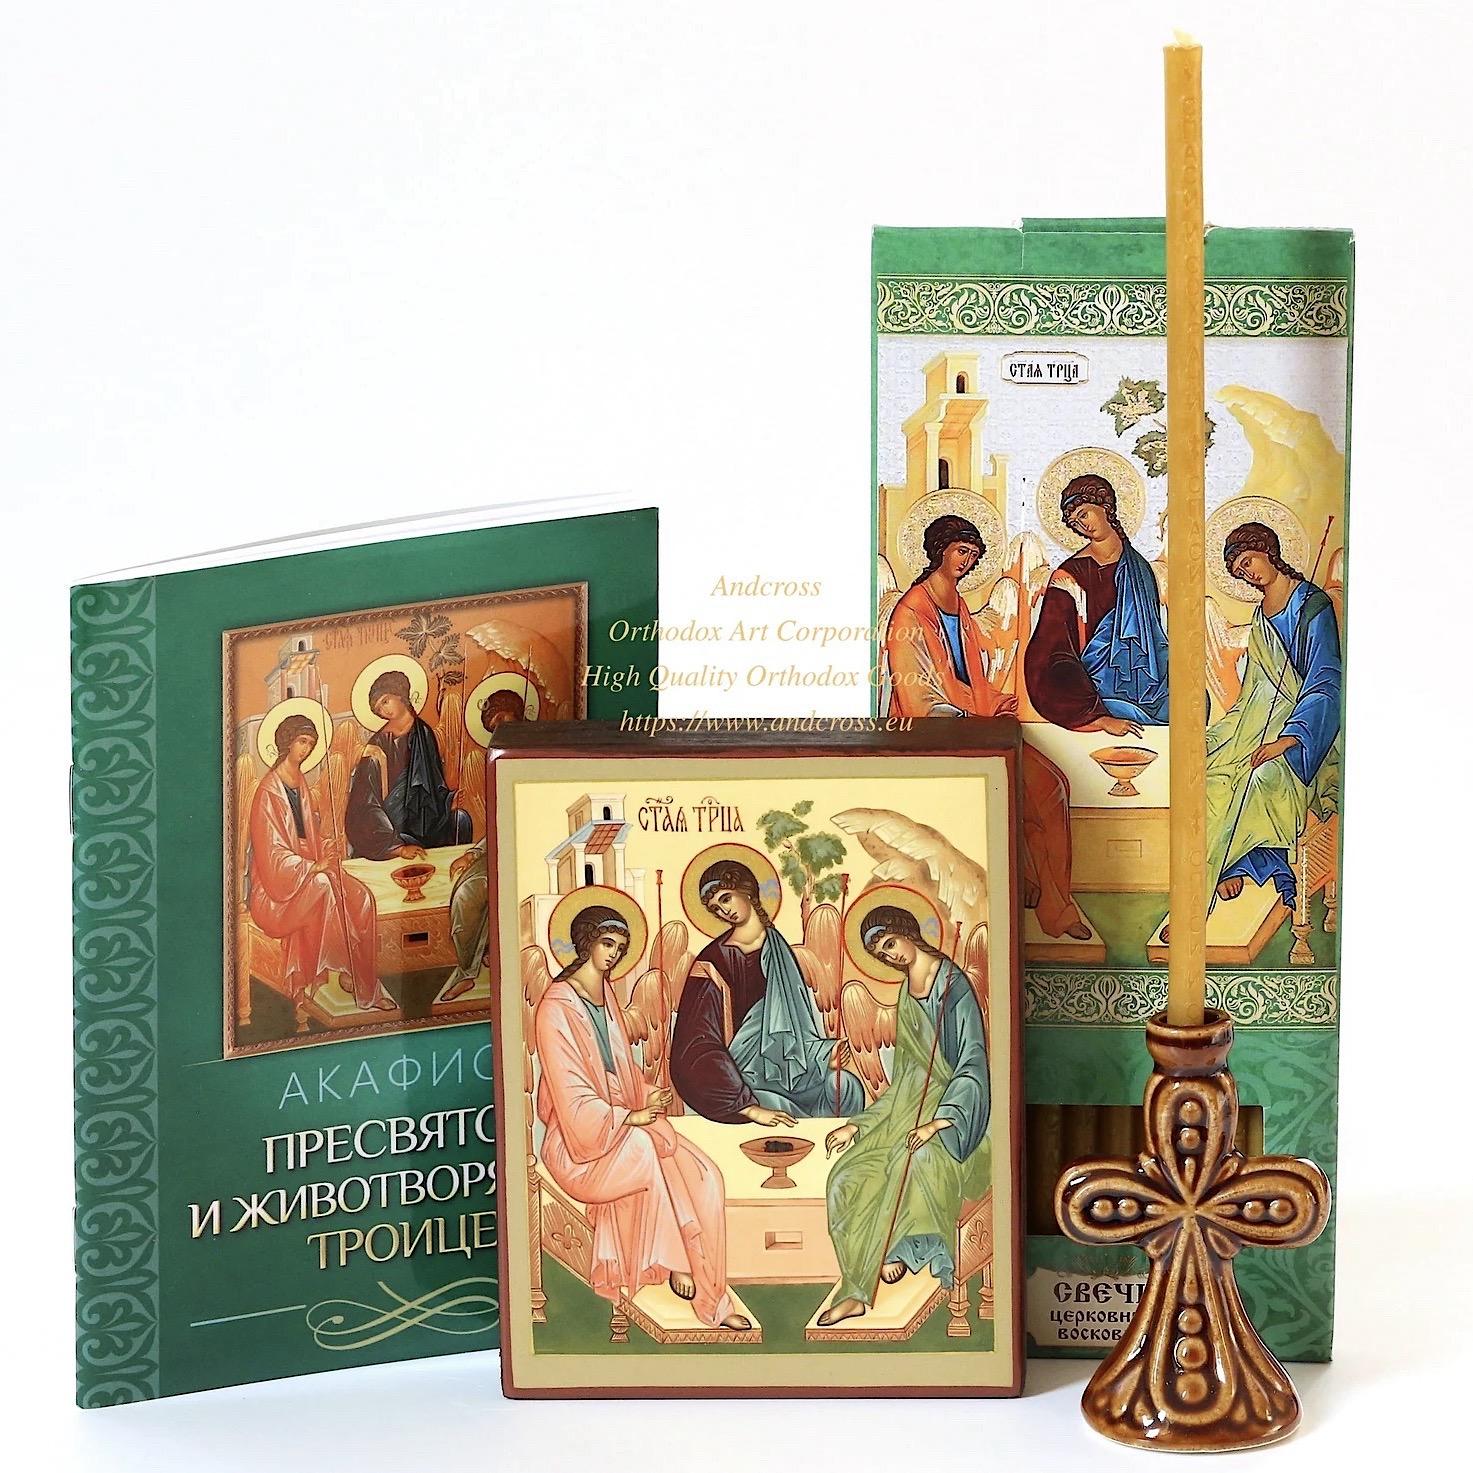 Orthodox Gift Set With The Icon Of The Holy Trinity From Holy Dormition Pskovo-Petchersky Monastery. B472|Orthodox Gift Set With The Icon Of The Holy Trinity From Holy Dormition Pskovo-Petchersky Monastery. B472